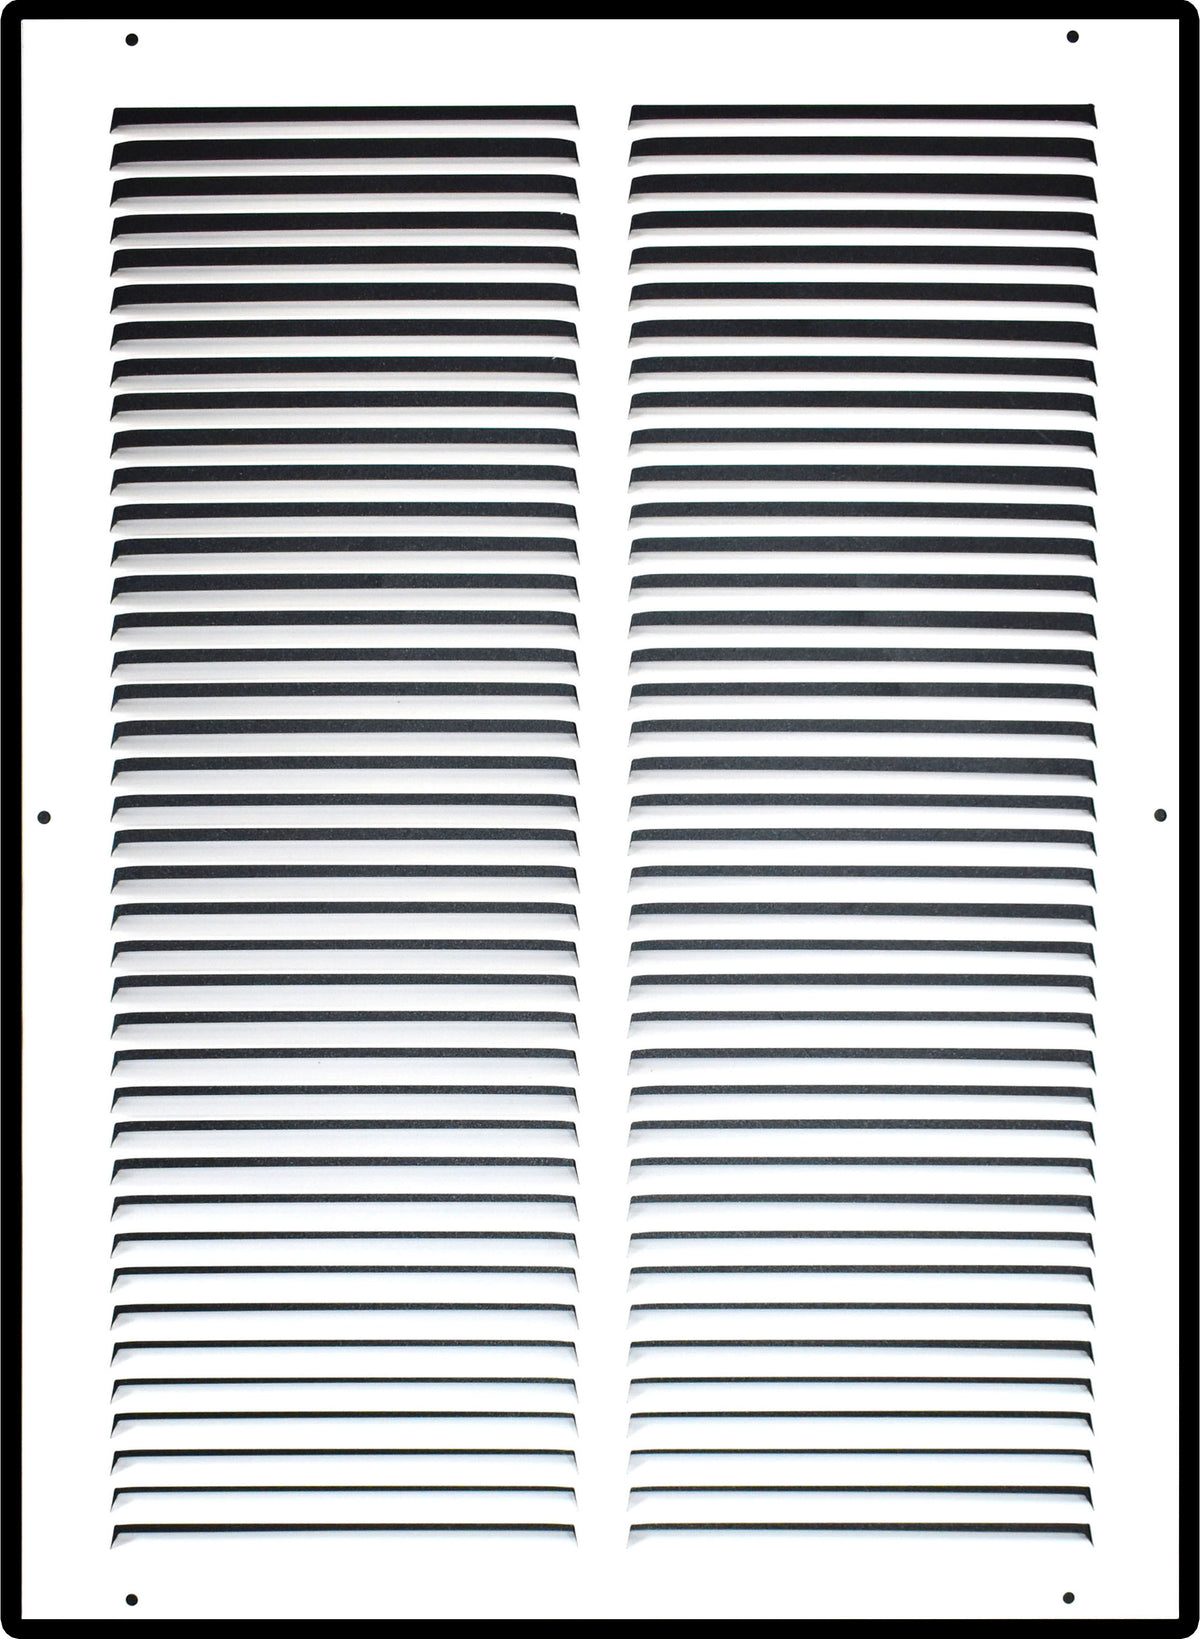 airgrilles 14" x 20" duct opening  -  hd steel return air grille for sidewall and ceiling 7hnd-flt-rg-wh-14x20 038775640701 - 1